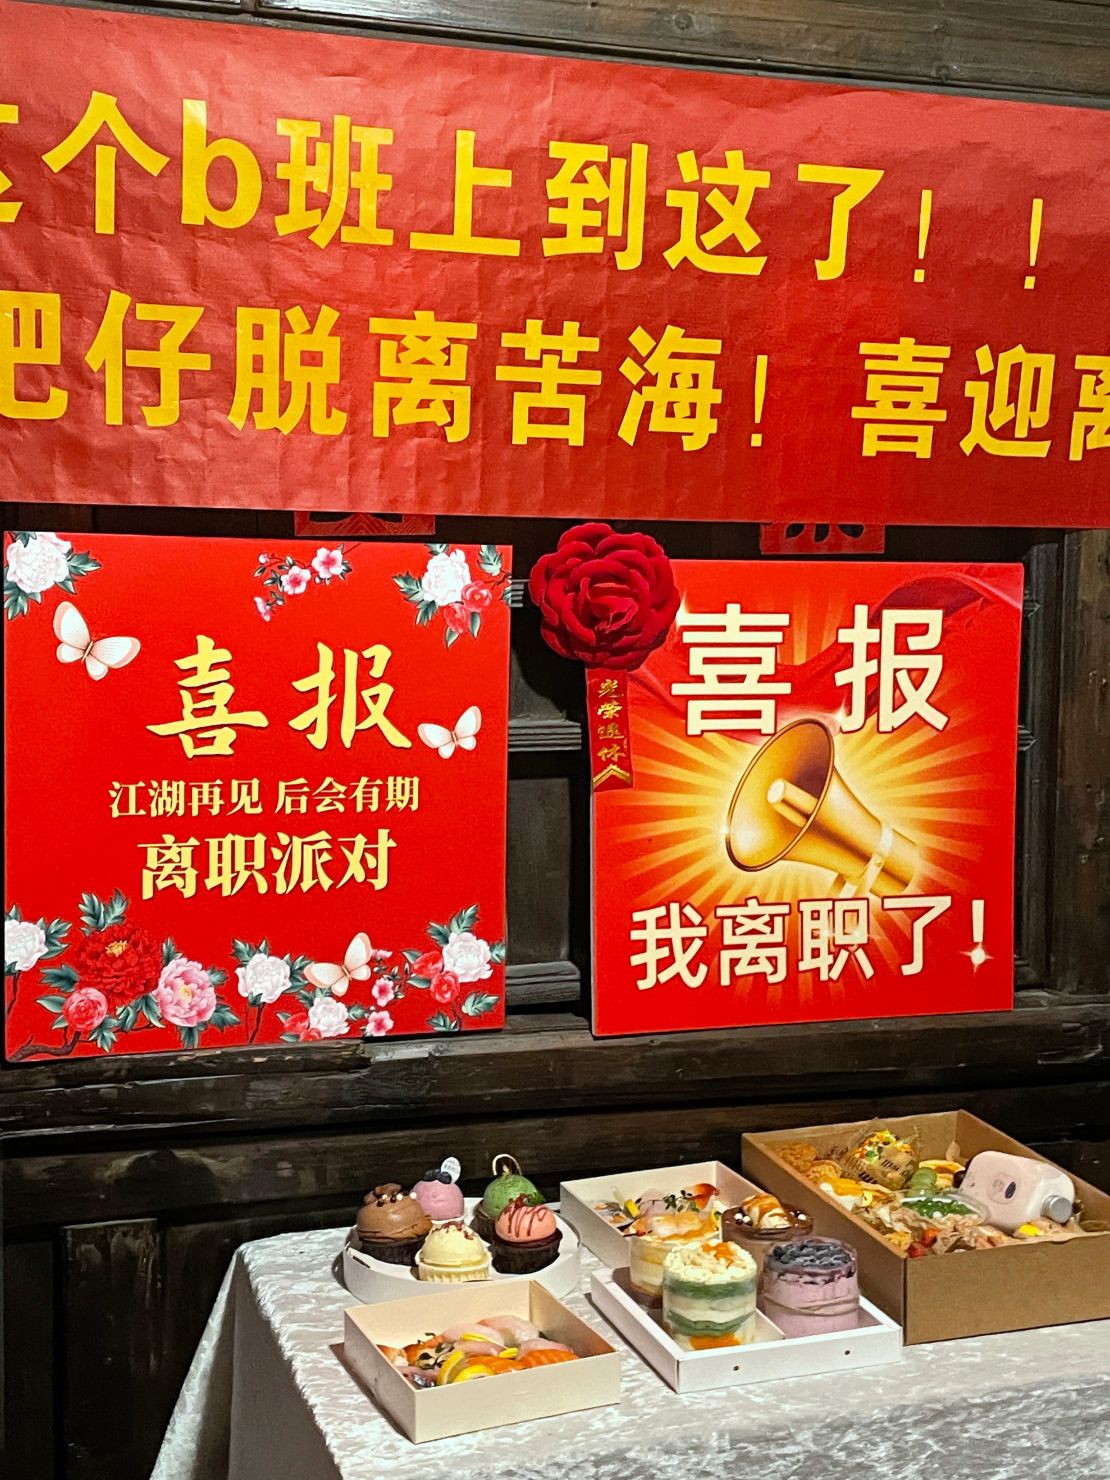 Cakes and pastries at Liang's resignation party. The sign reads: 'I quit!'